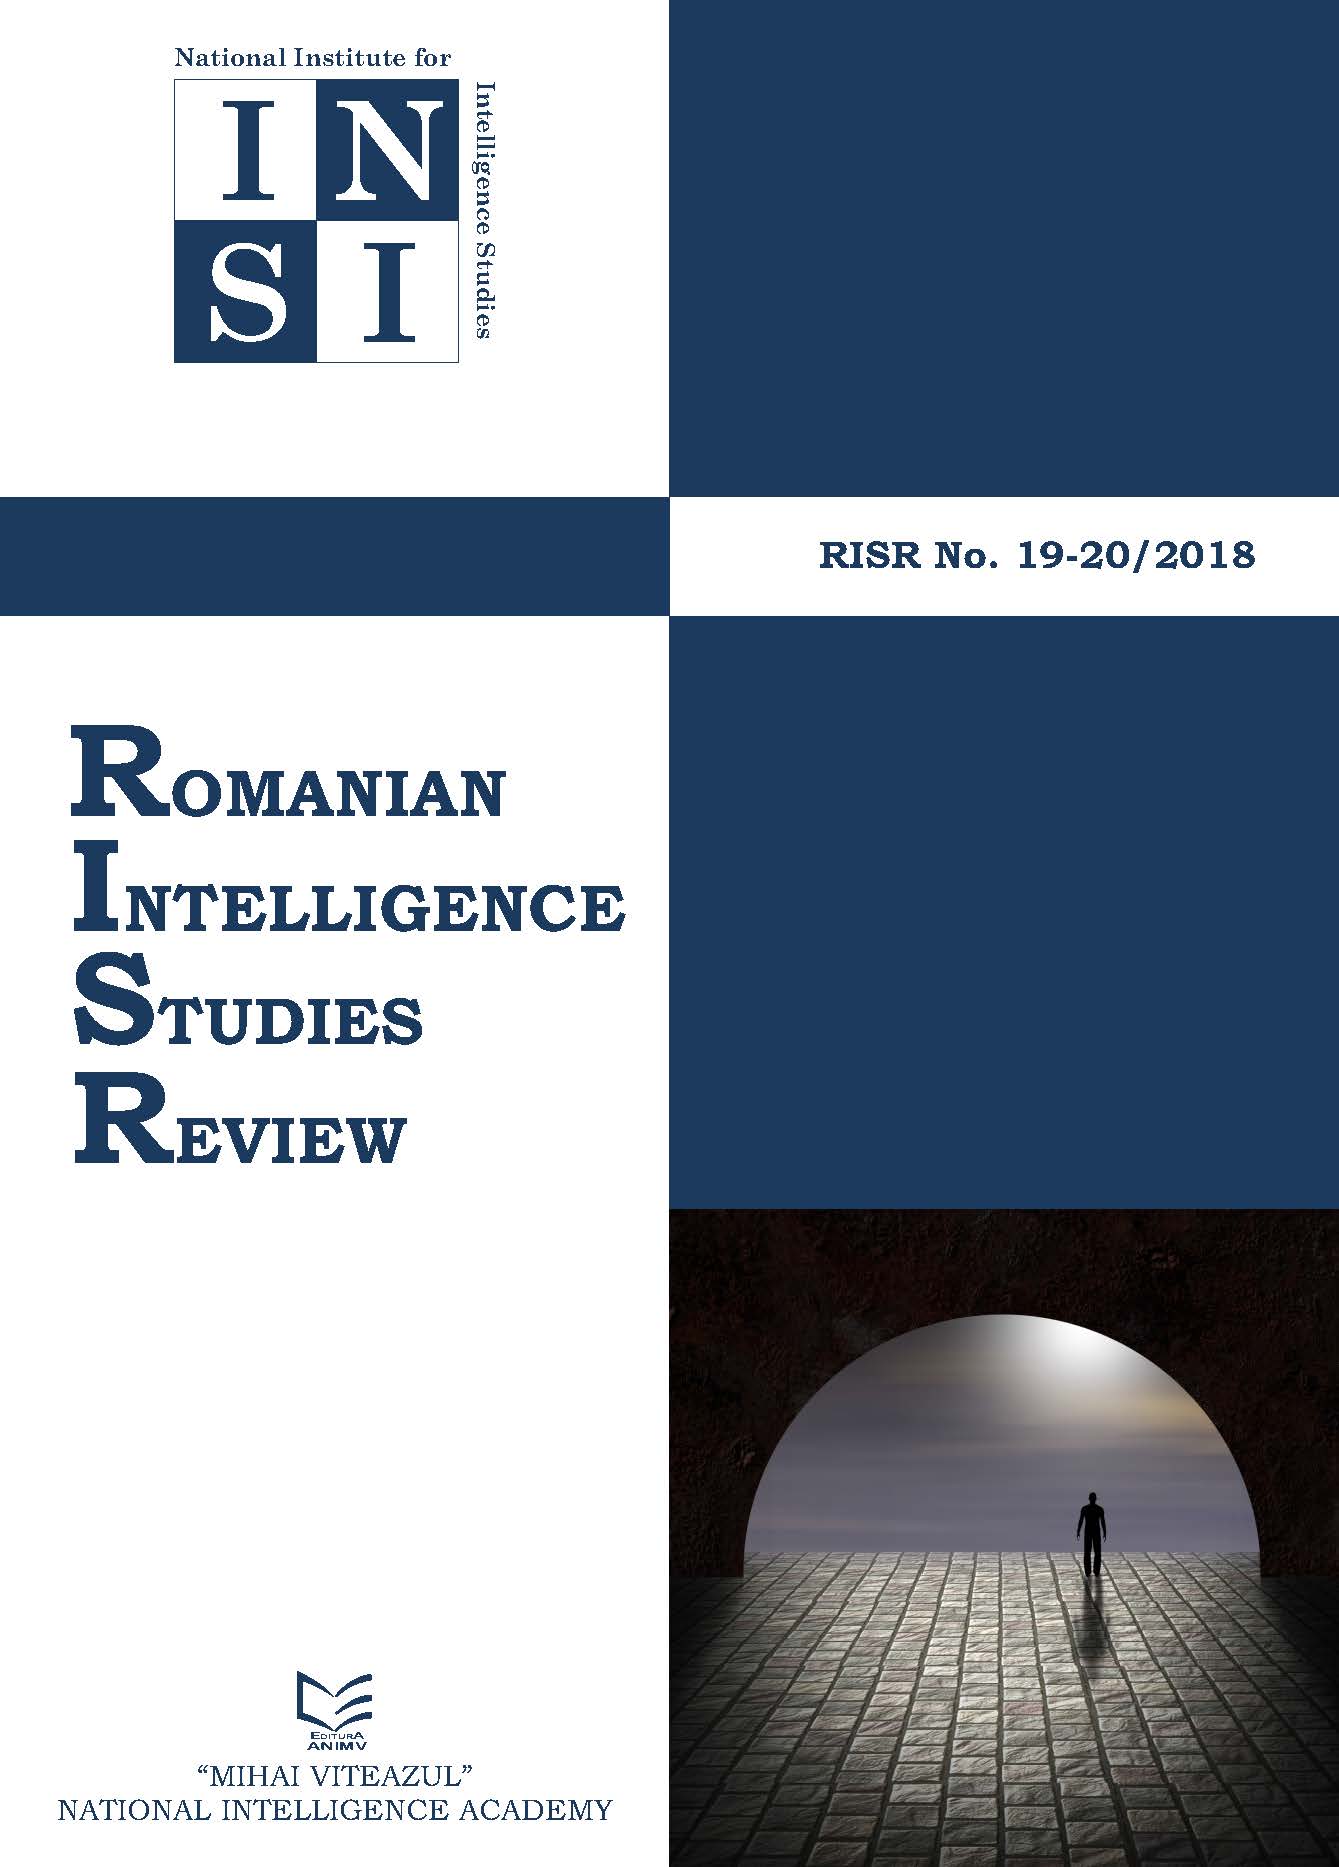 SECURITY IN THE BLAK SEA REGION: SHARED CHALLENGES, SUSTAINABLE FUTURE PROGRAM. THE NEW GREAT GAME – CONNECTING THE BLACK SEA AND THE BALKANS, Constanța – June 11-12, 2019 Cover Image